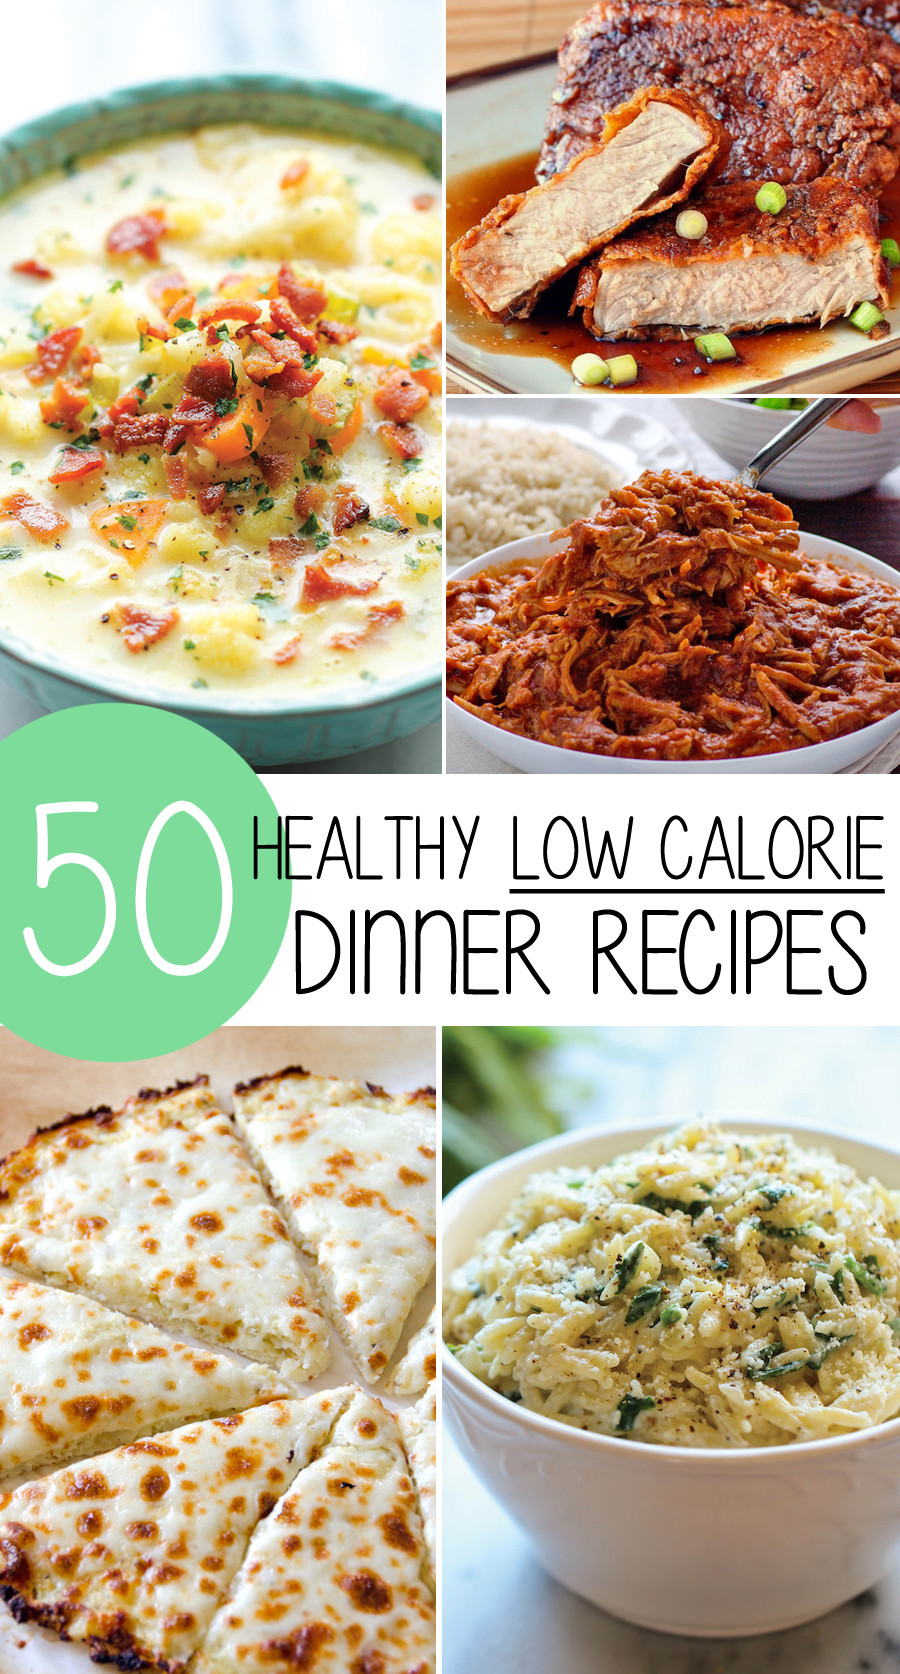 Good Low Calorie Dinners
 50 Healthy Low Calorie Weight Loss Dinner Recipes